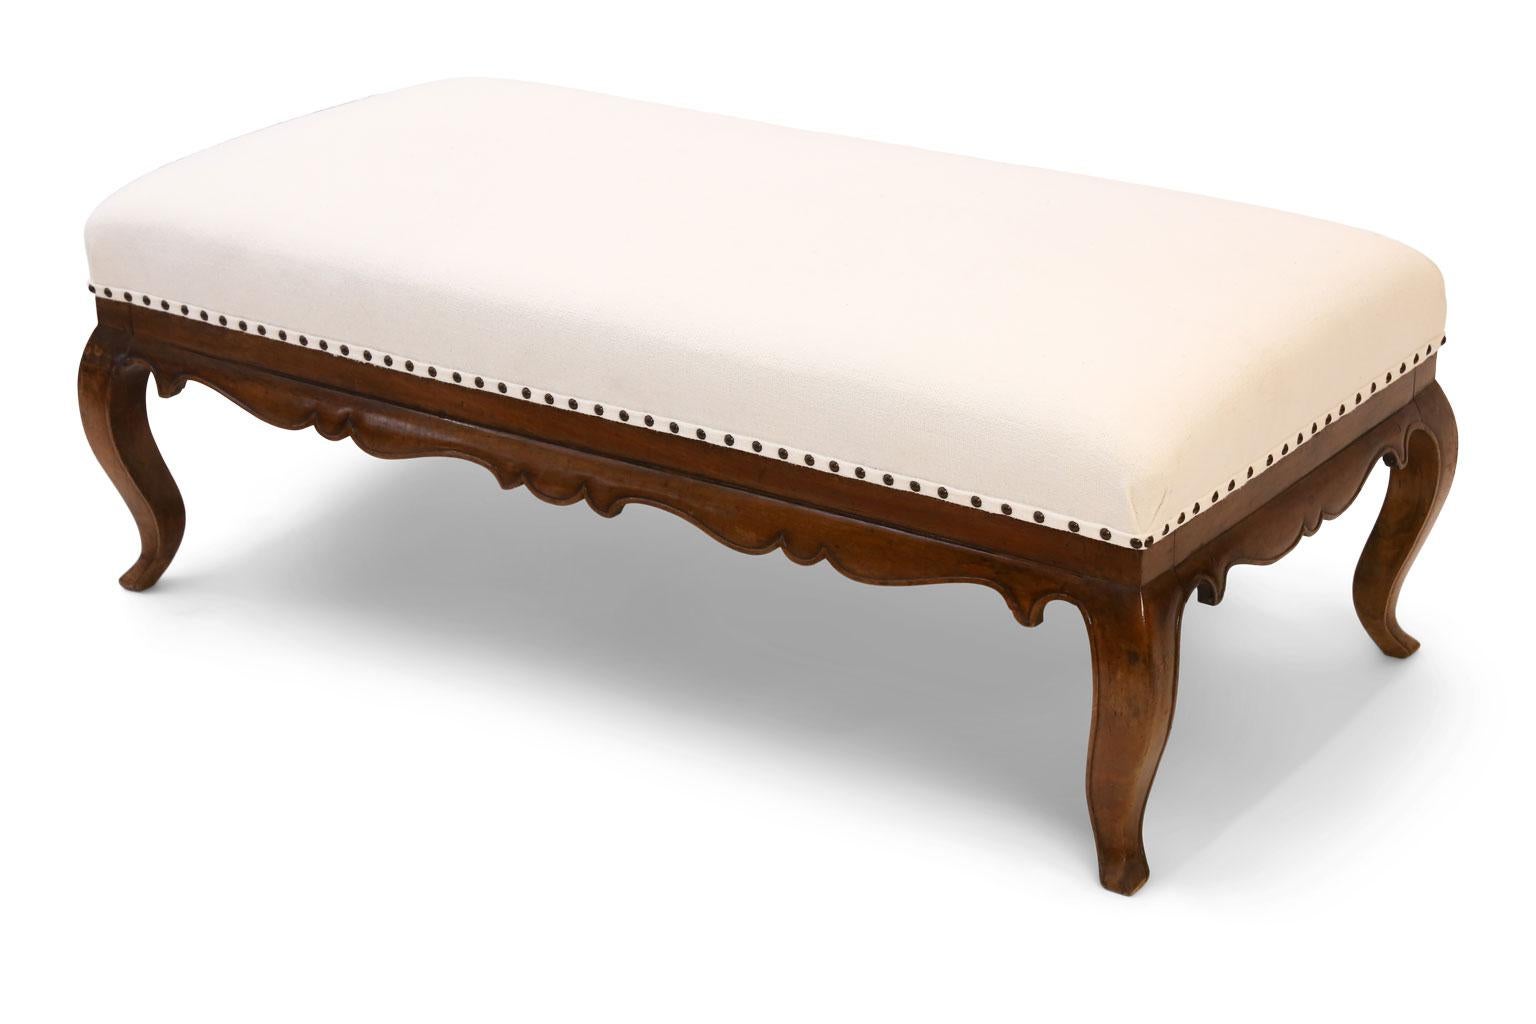 Upholstered French walnut bench in Louis XV style. Nicely carved cabriole legs and shaped apron.